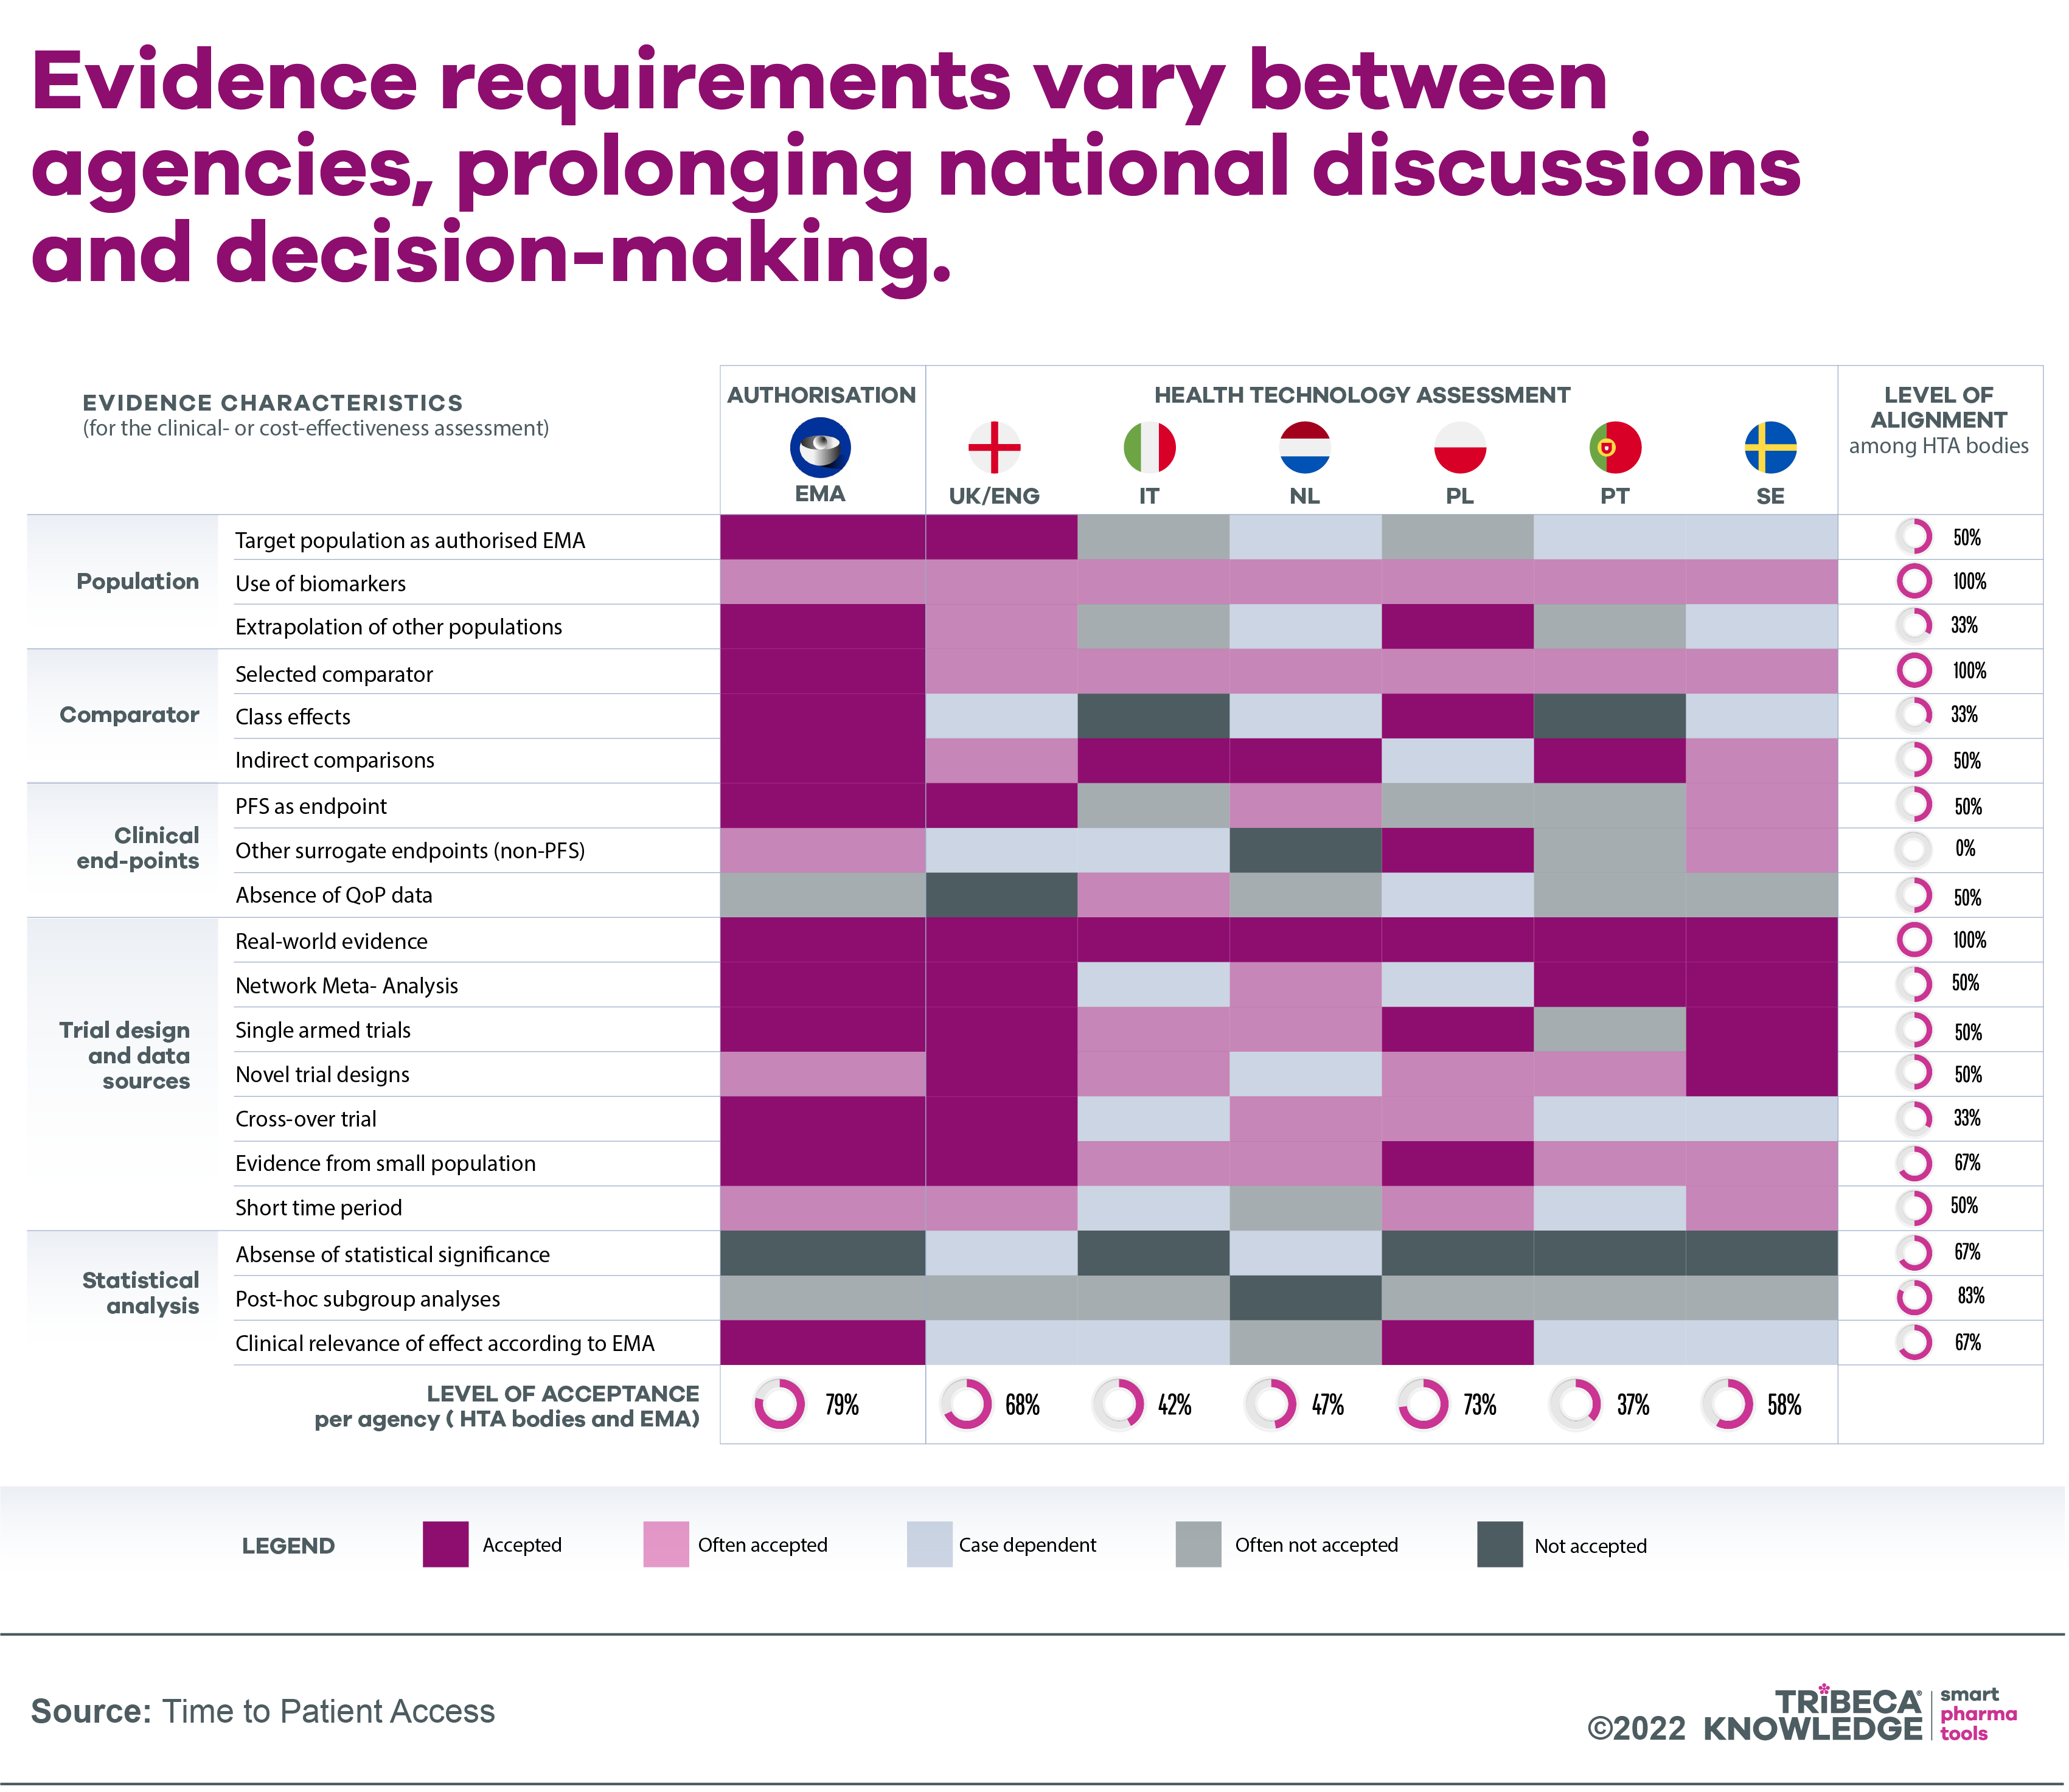 Graphic showing evidence requirements vary between agencies, prolonging national discussions and decision-making.